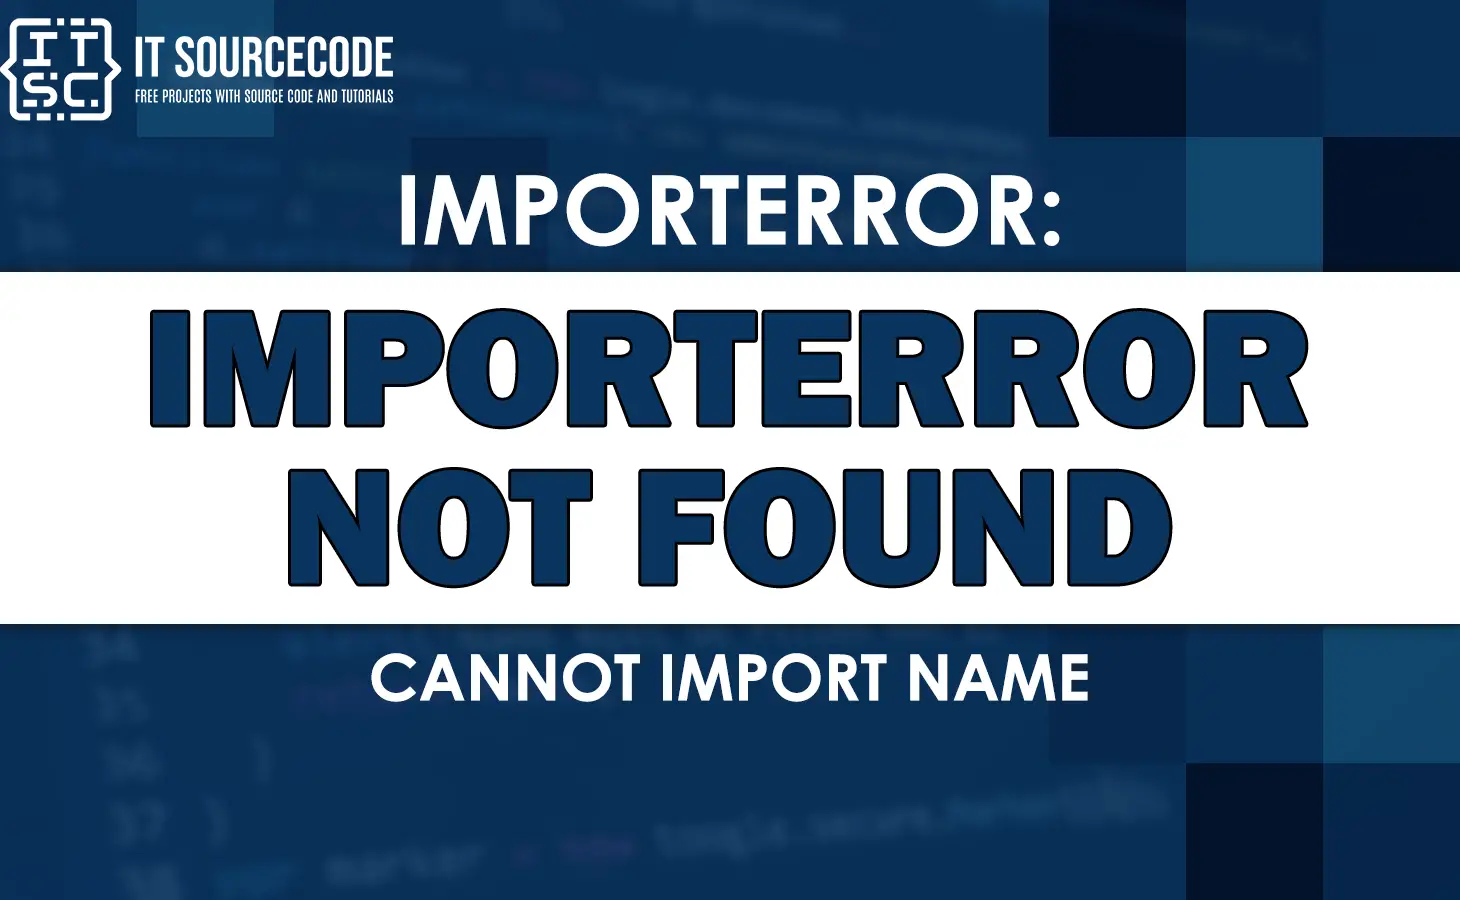 Importerror cannot import name 'typealias' from 'typing'